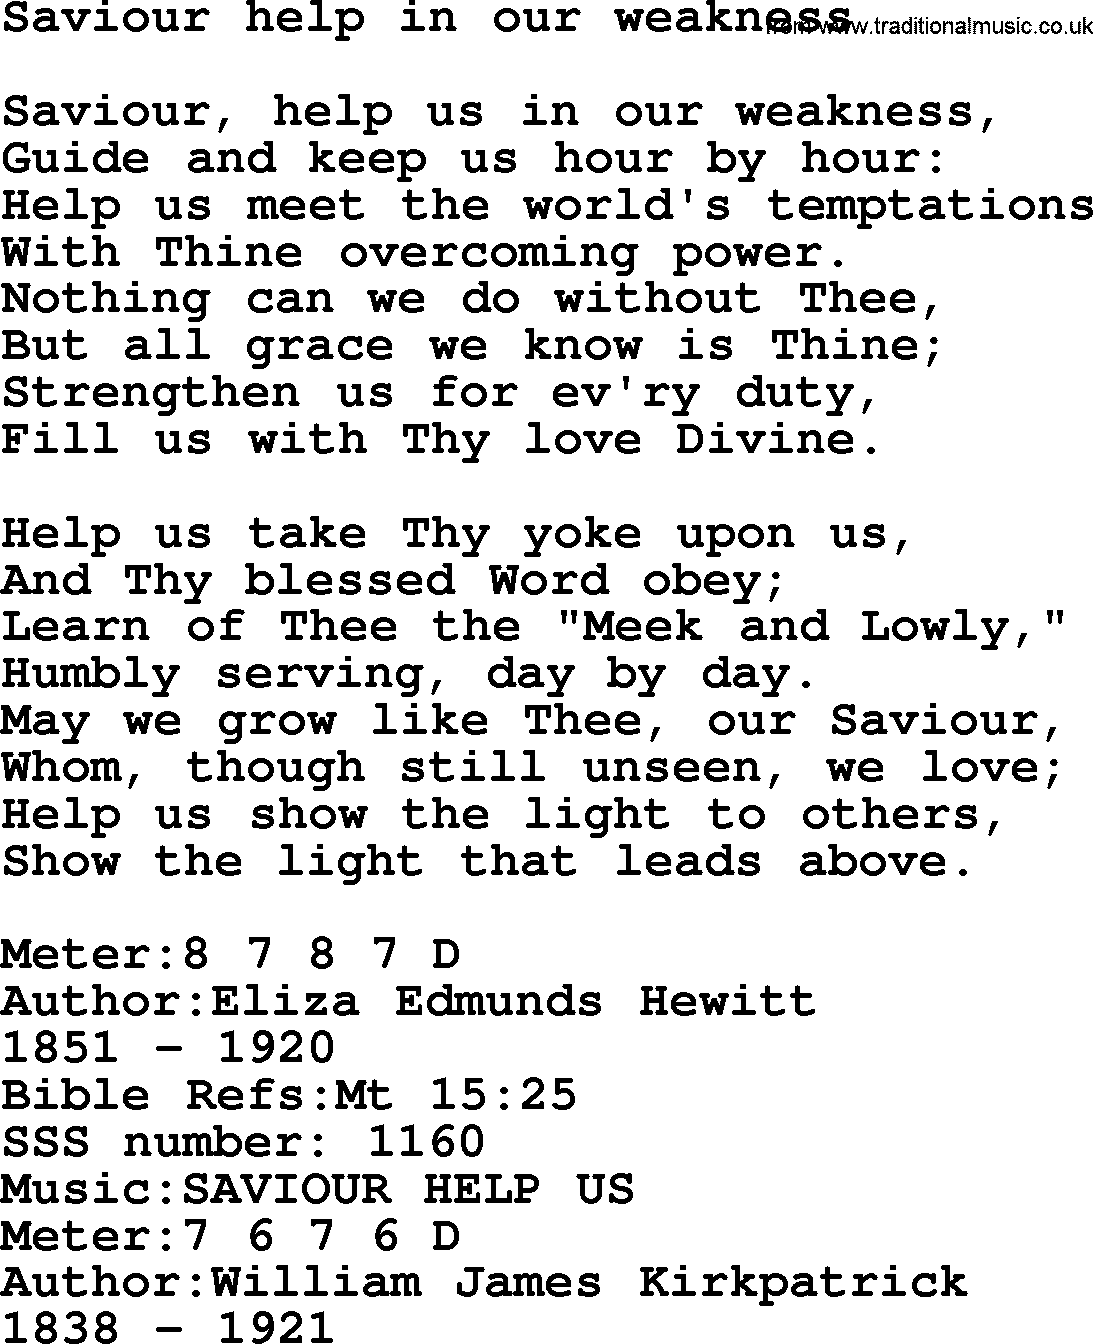 Sacred Songs and Solos complete, 1200 Hymns, title: Saviour Help In Our Weakness, lyrics and PDF